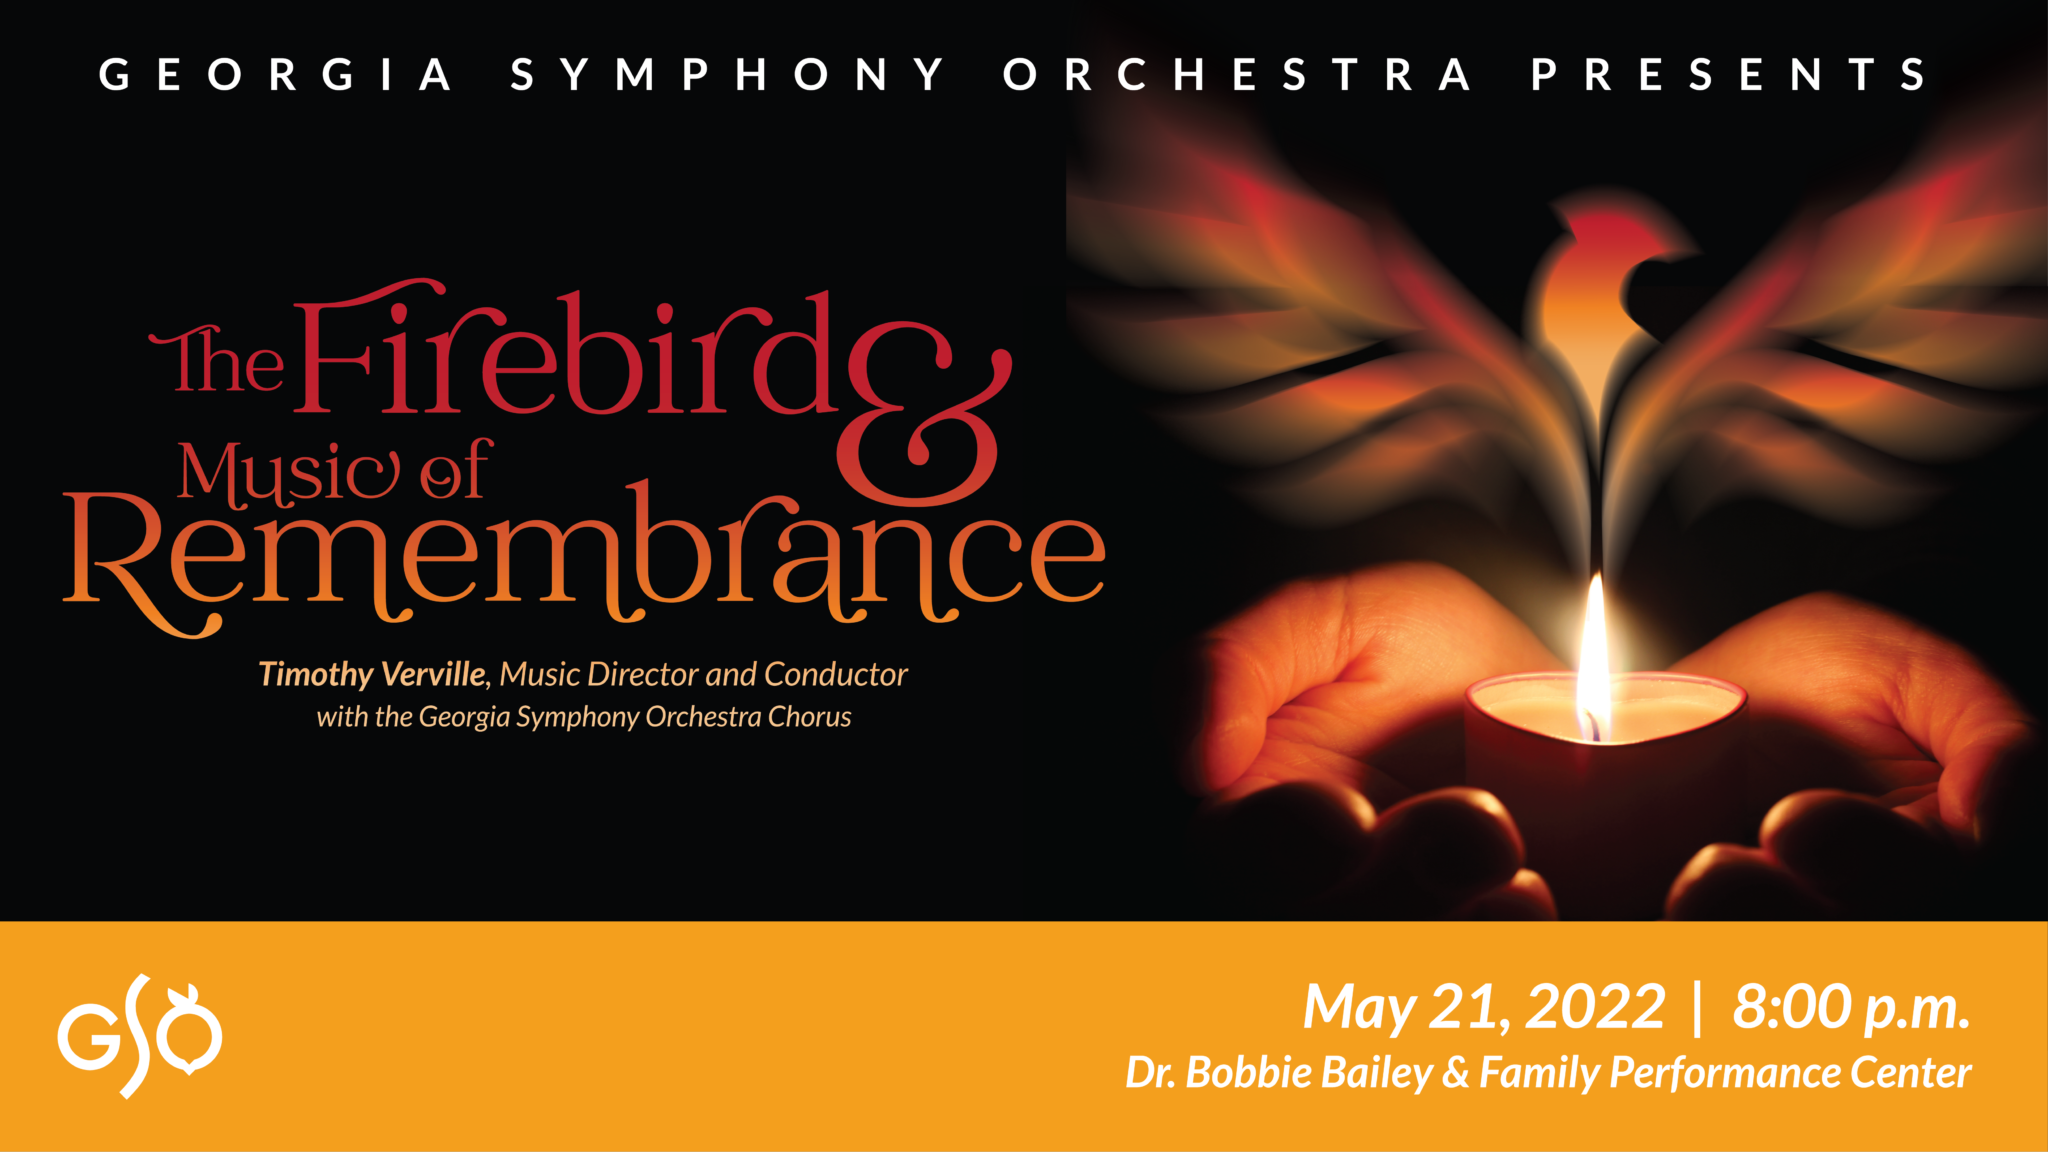 The Firebird and Music of Remembrance